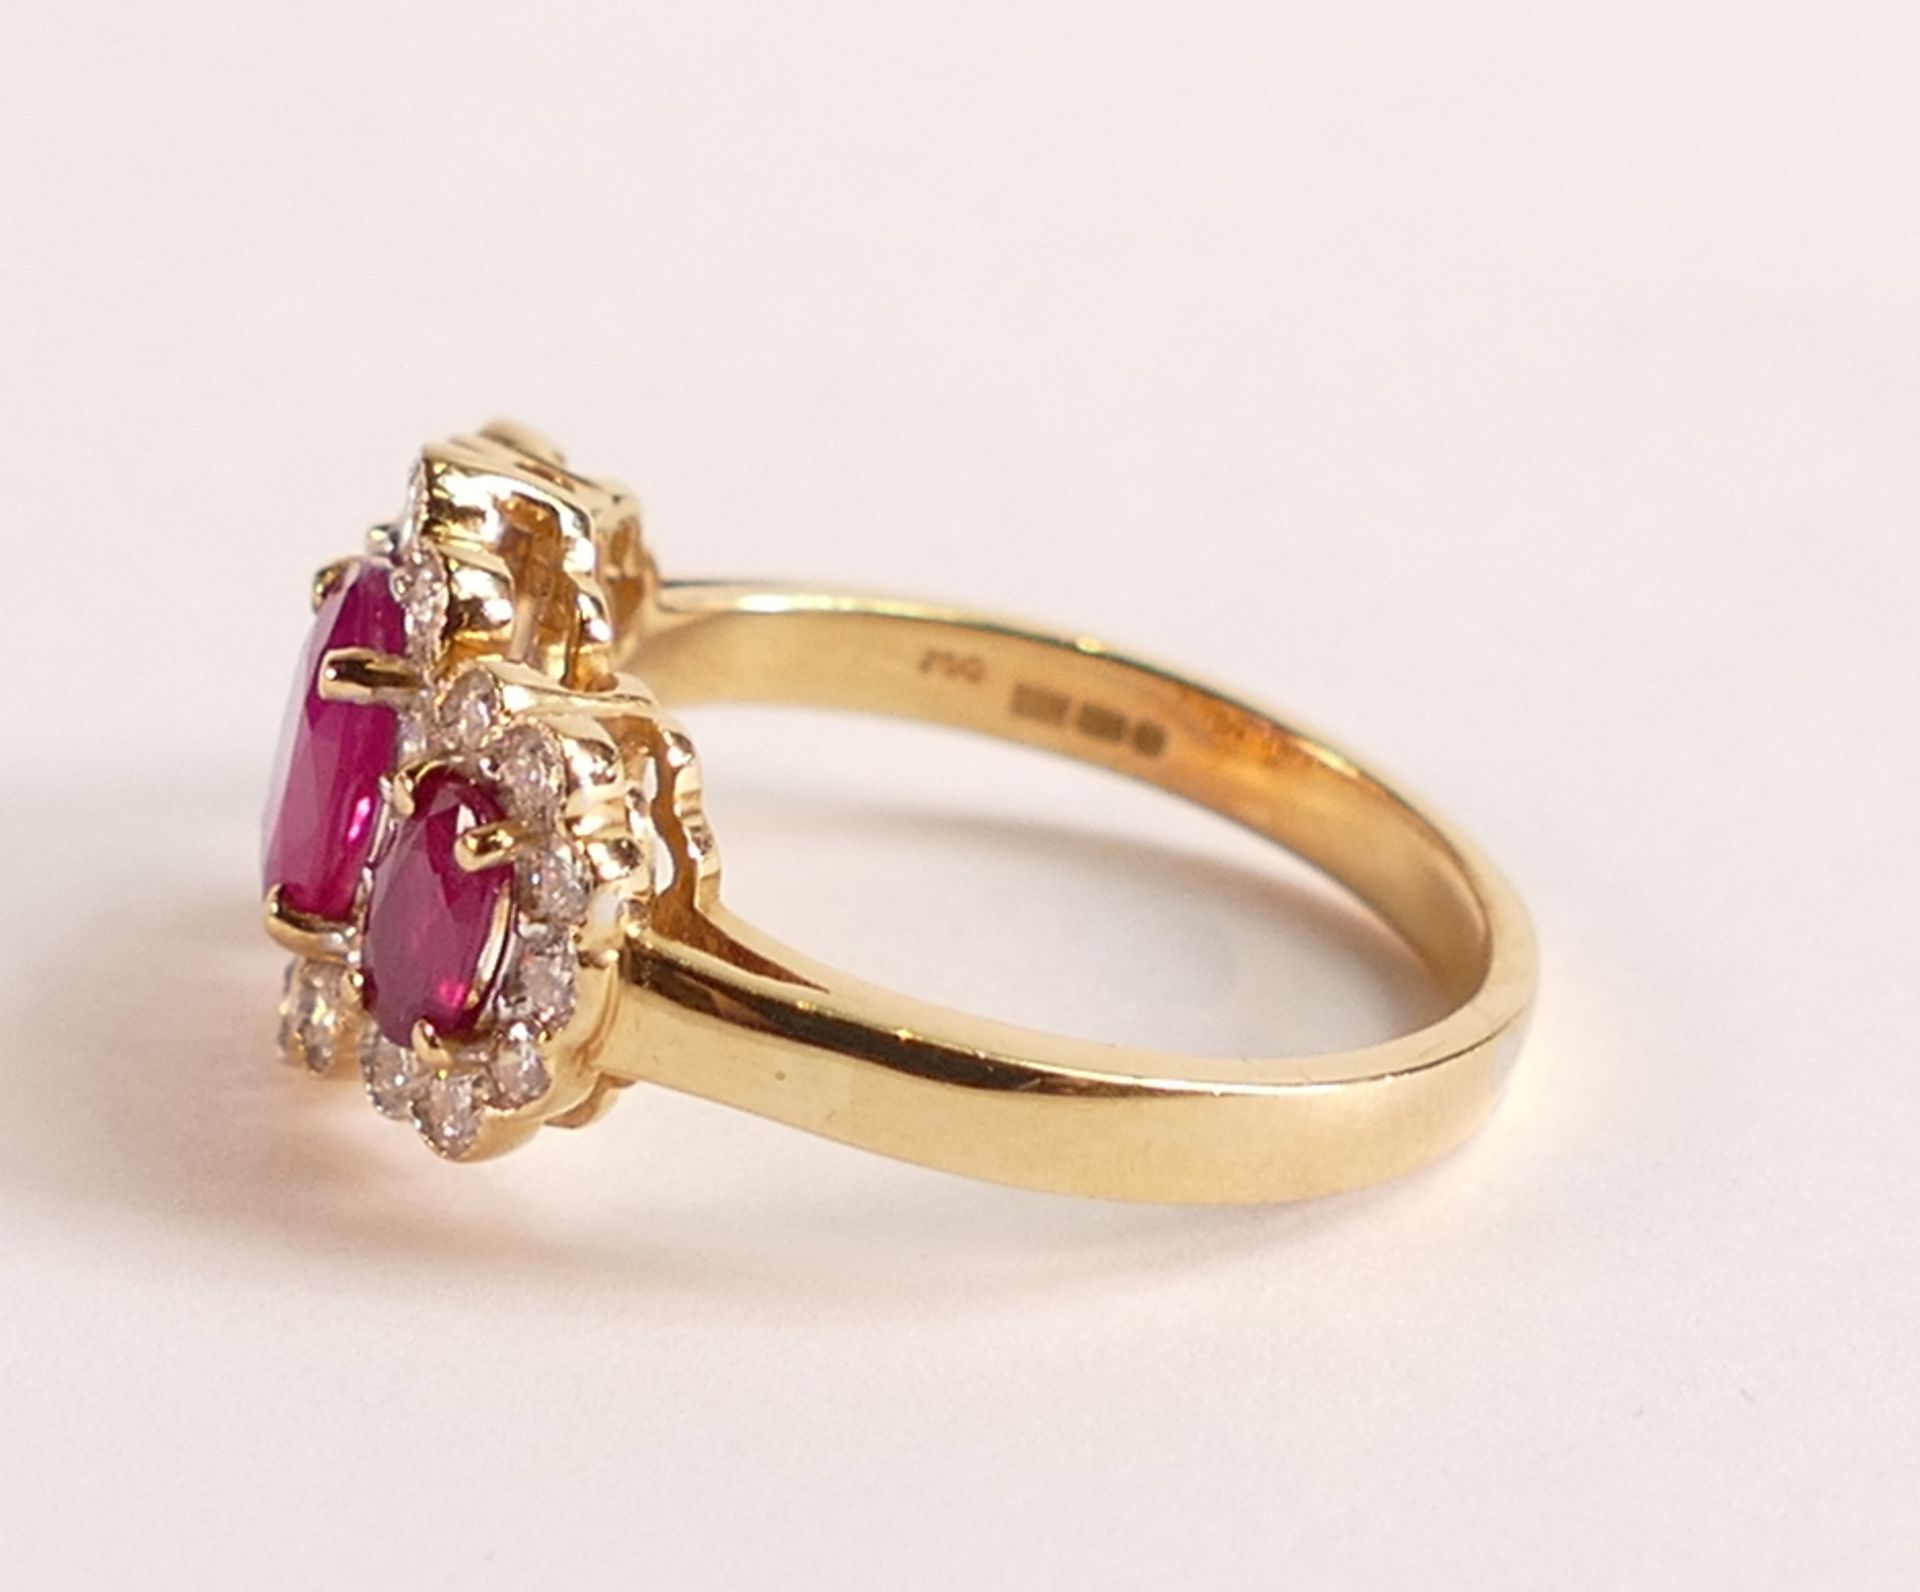 18ct Gold Ring With Ruby And Diamond Stamped 750 (18ct) and Hallmarked Birmingham. Weight 4.8 grams, - Image 2 of 3